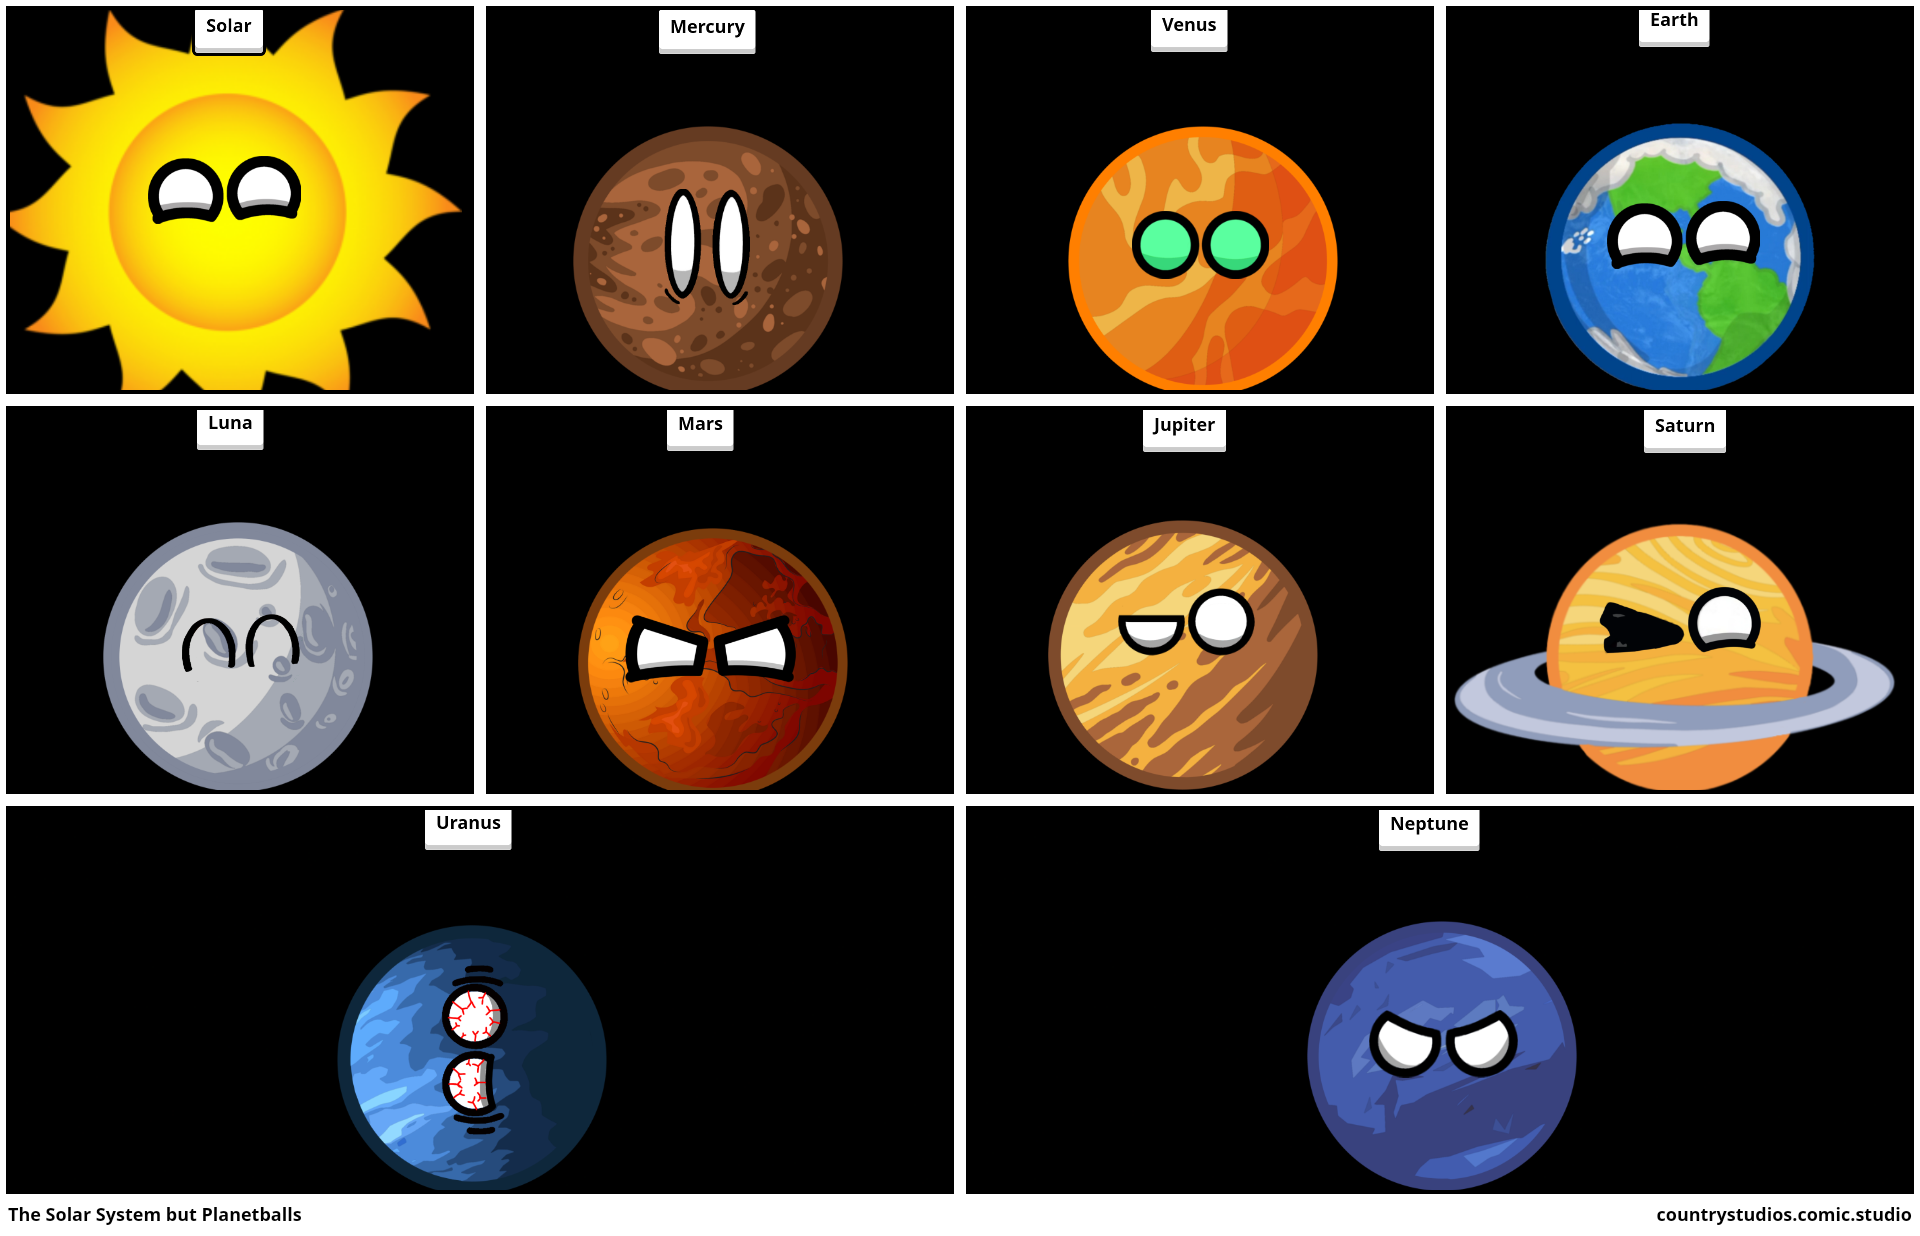 The Solar System but Planetballs